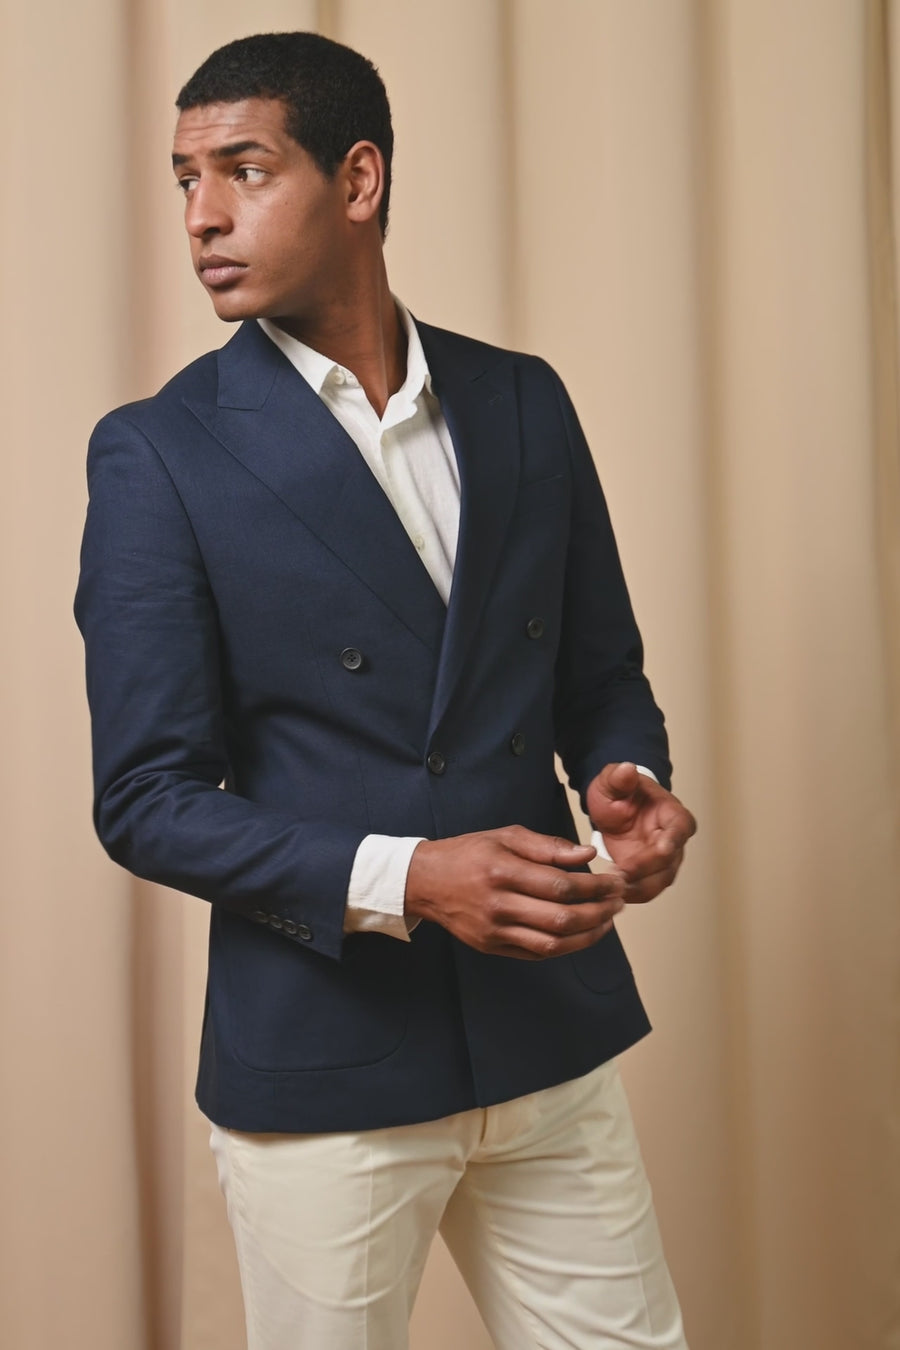 Linen Contemporary Linen Double Breasted Blazer Jacket in Navy Blue